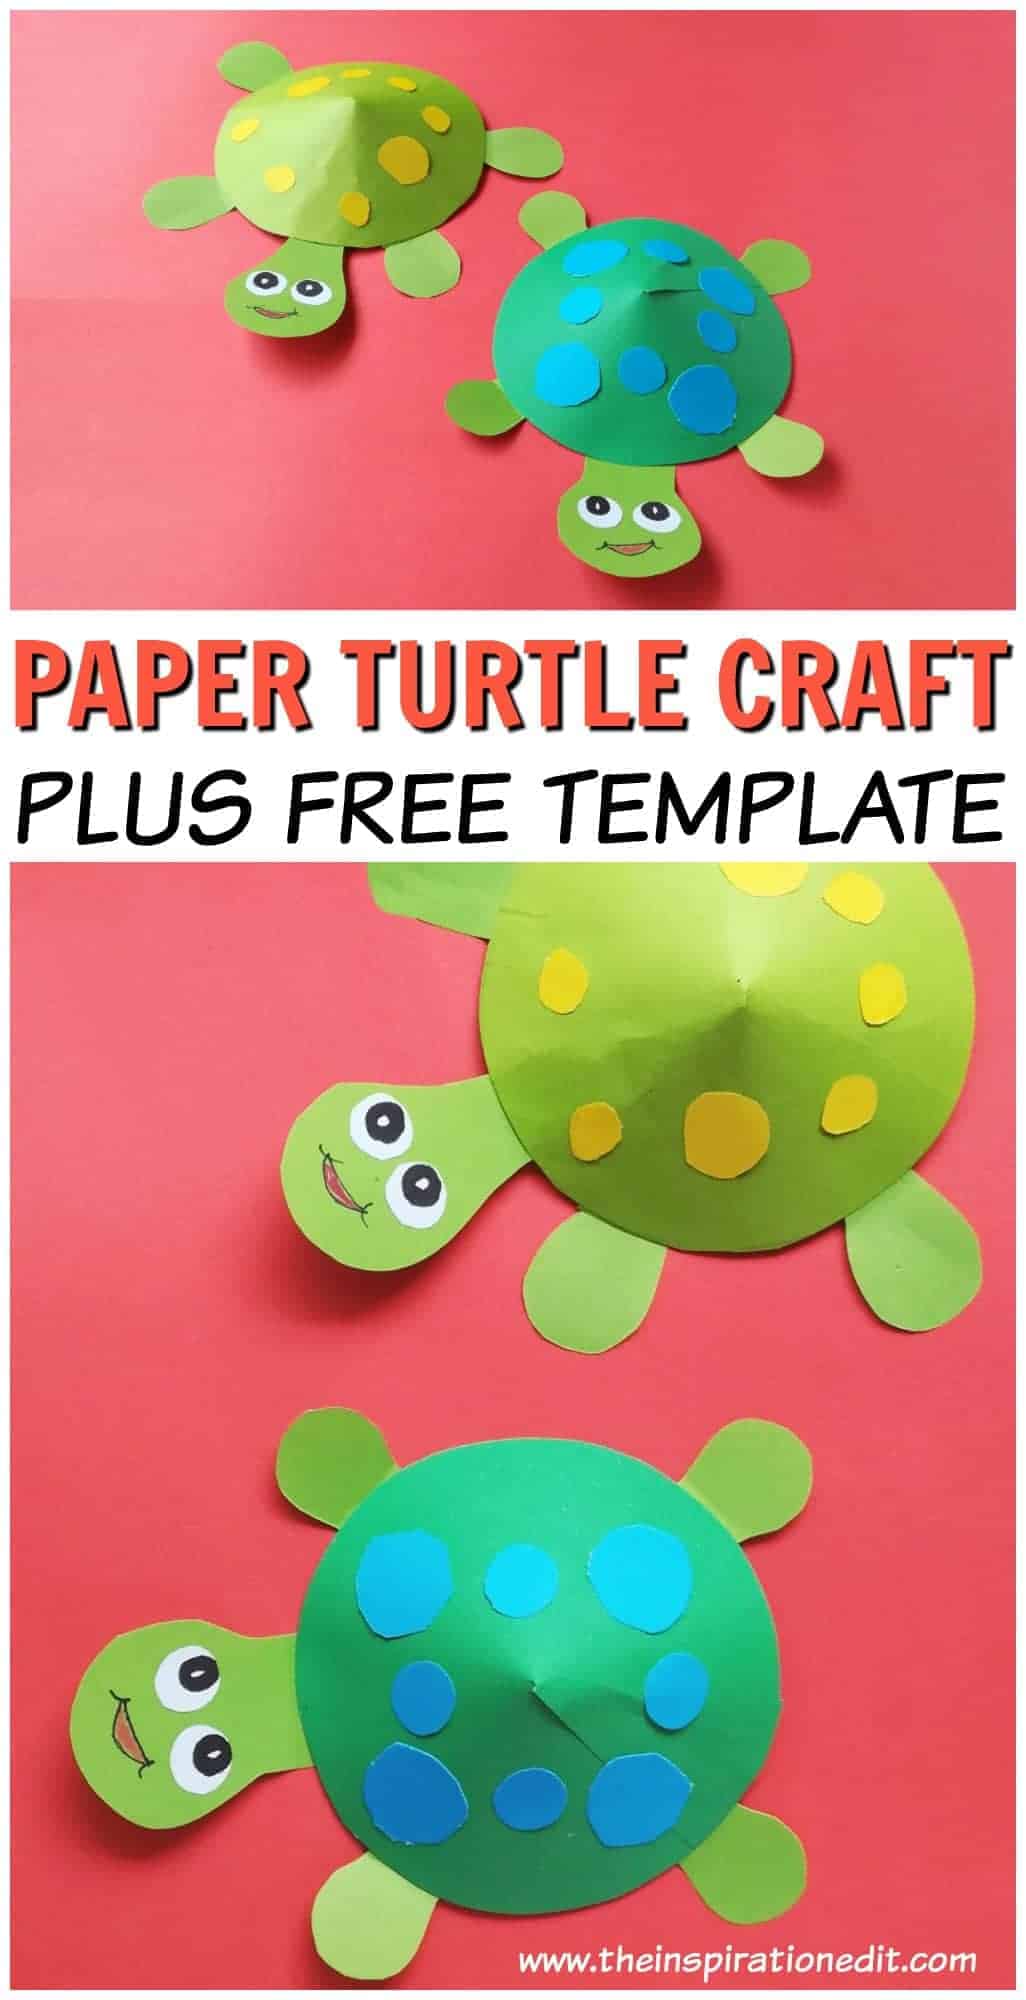 Paper Turtle Craft to Do With Kids · The Inspiration Edit